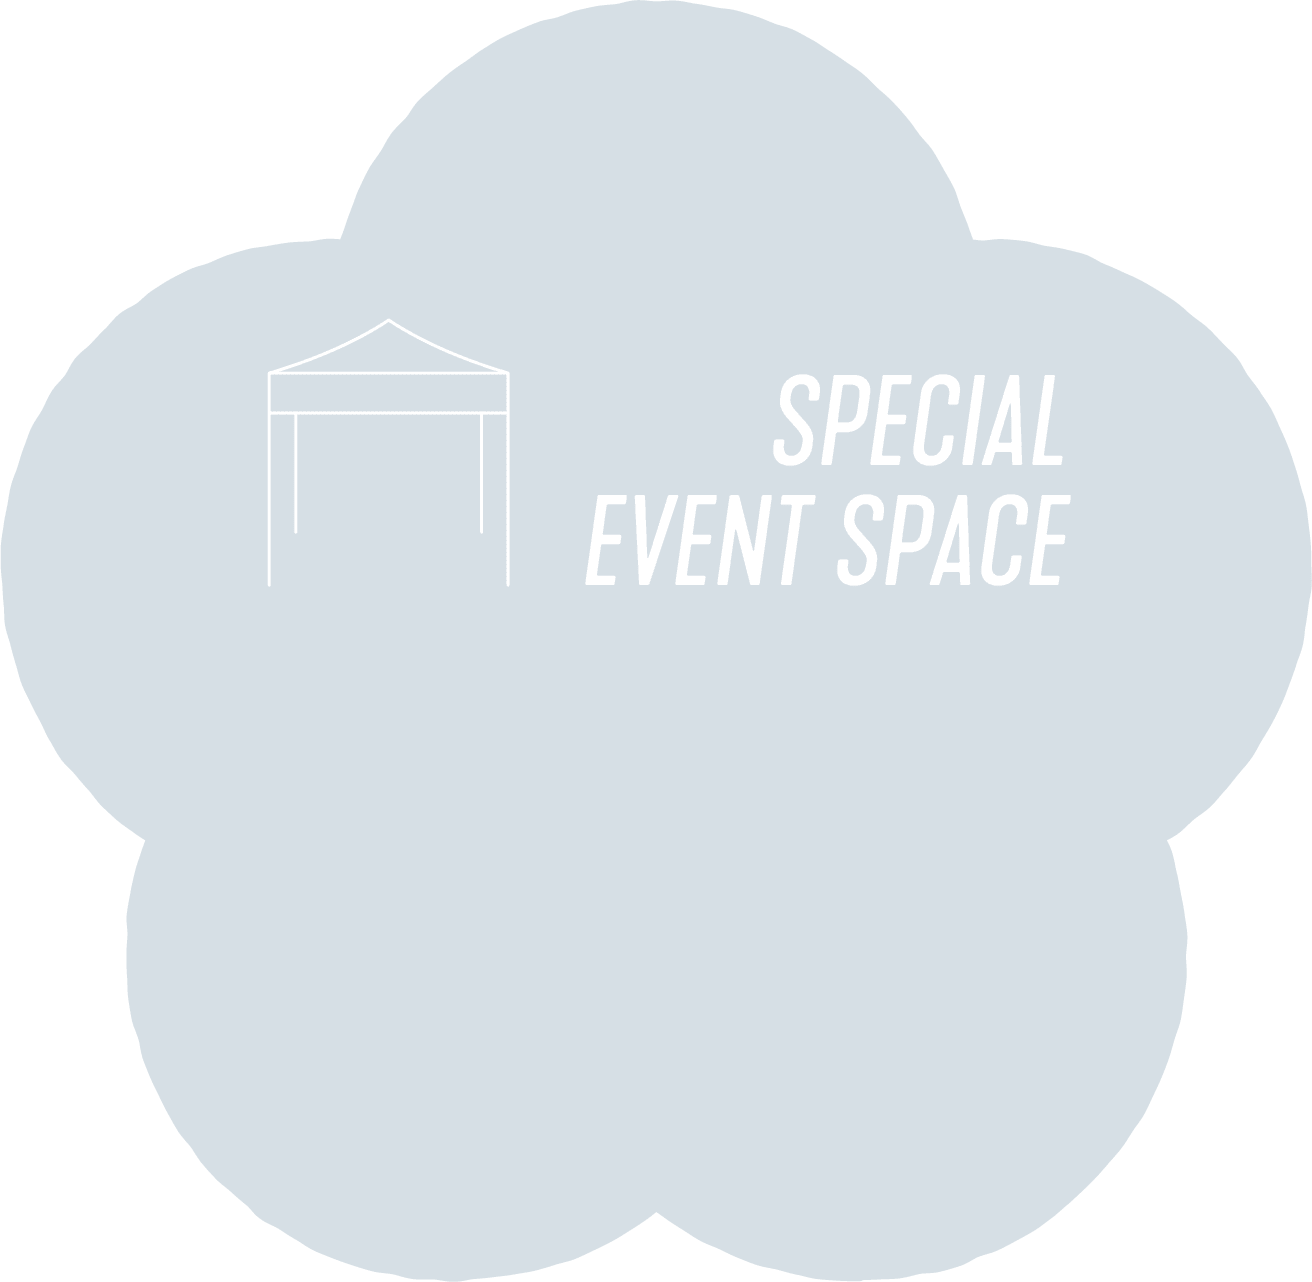 SPECIAL EVENT SPACE